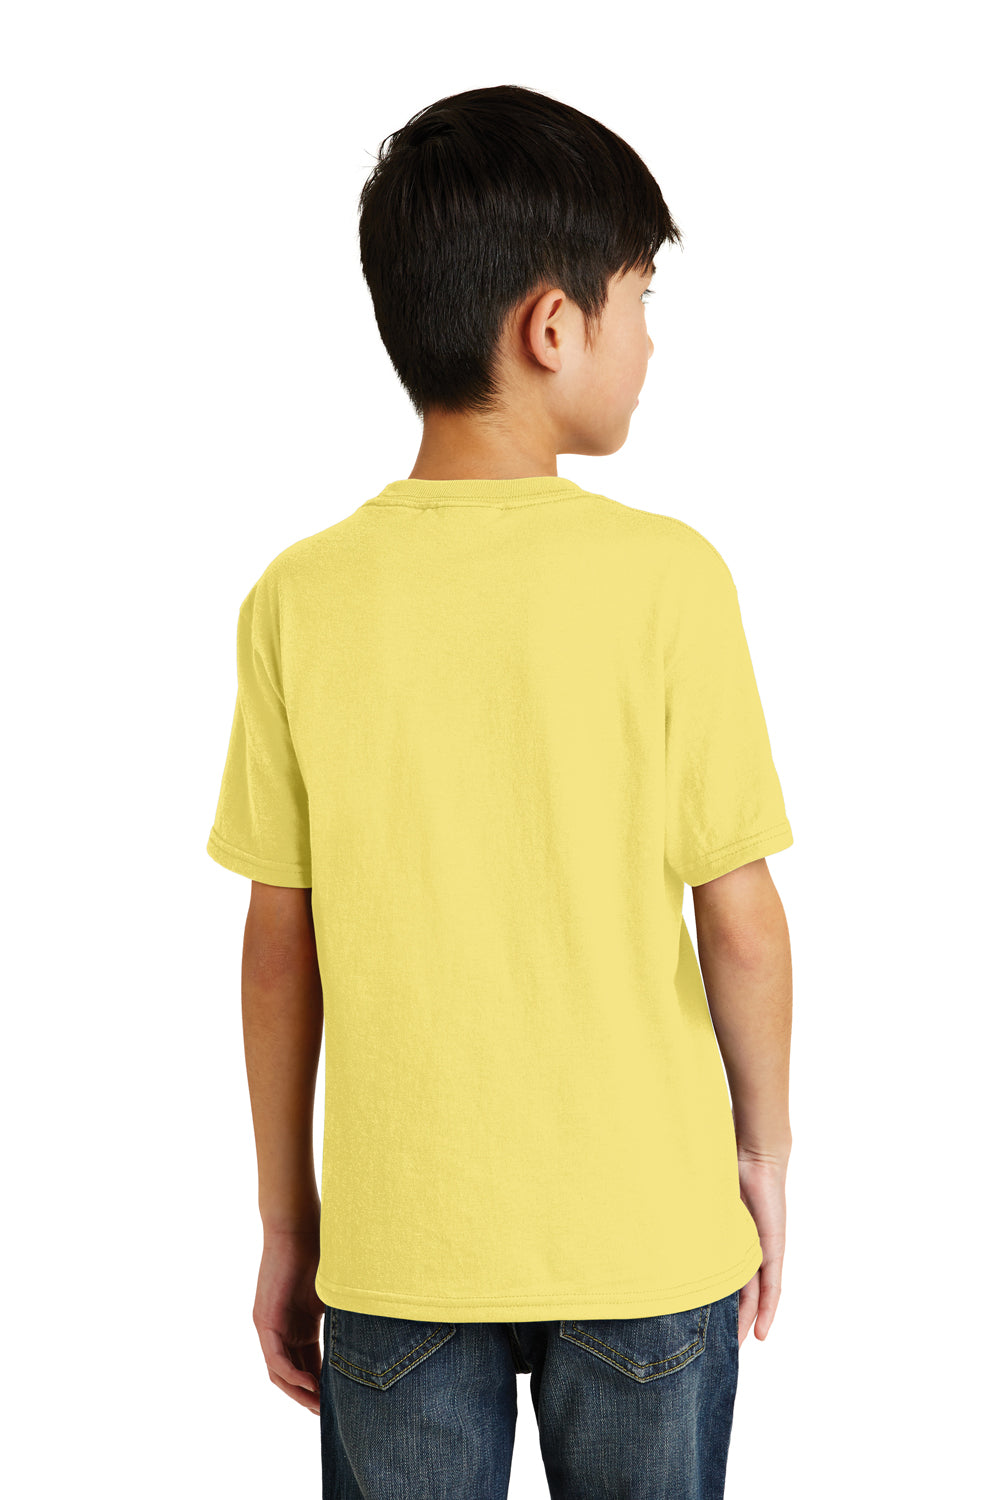 Port & Company PC55Y Youth Core Short Sleeve Crewneck T-Shirt Yellow Back